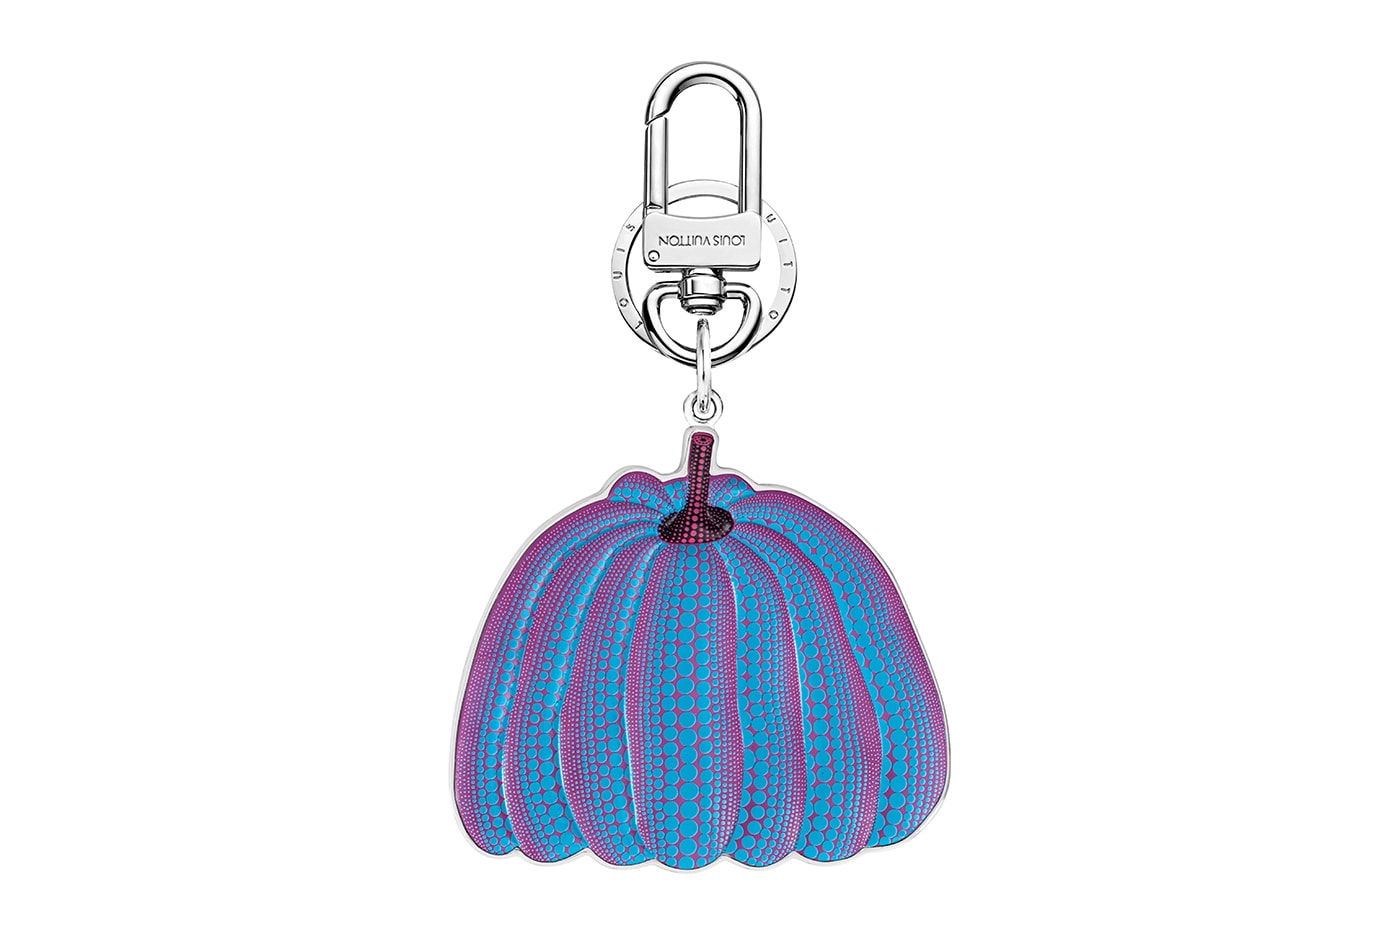 Louis Vuitton Limited Edition Flagship store keychain - Tokyo